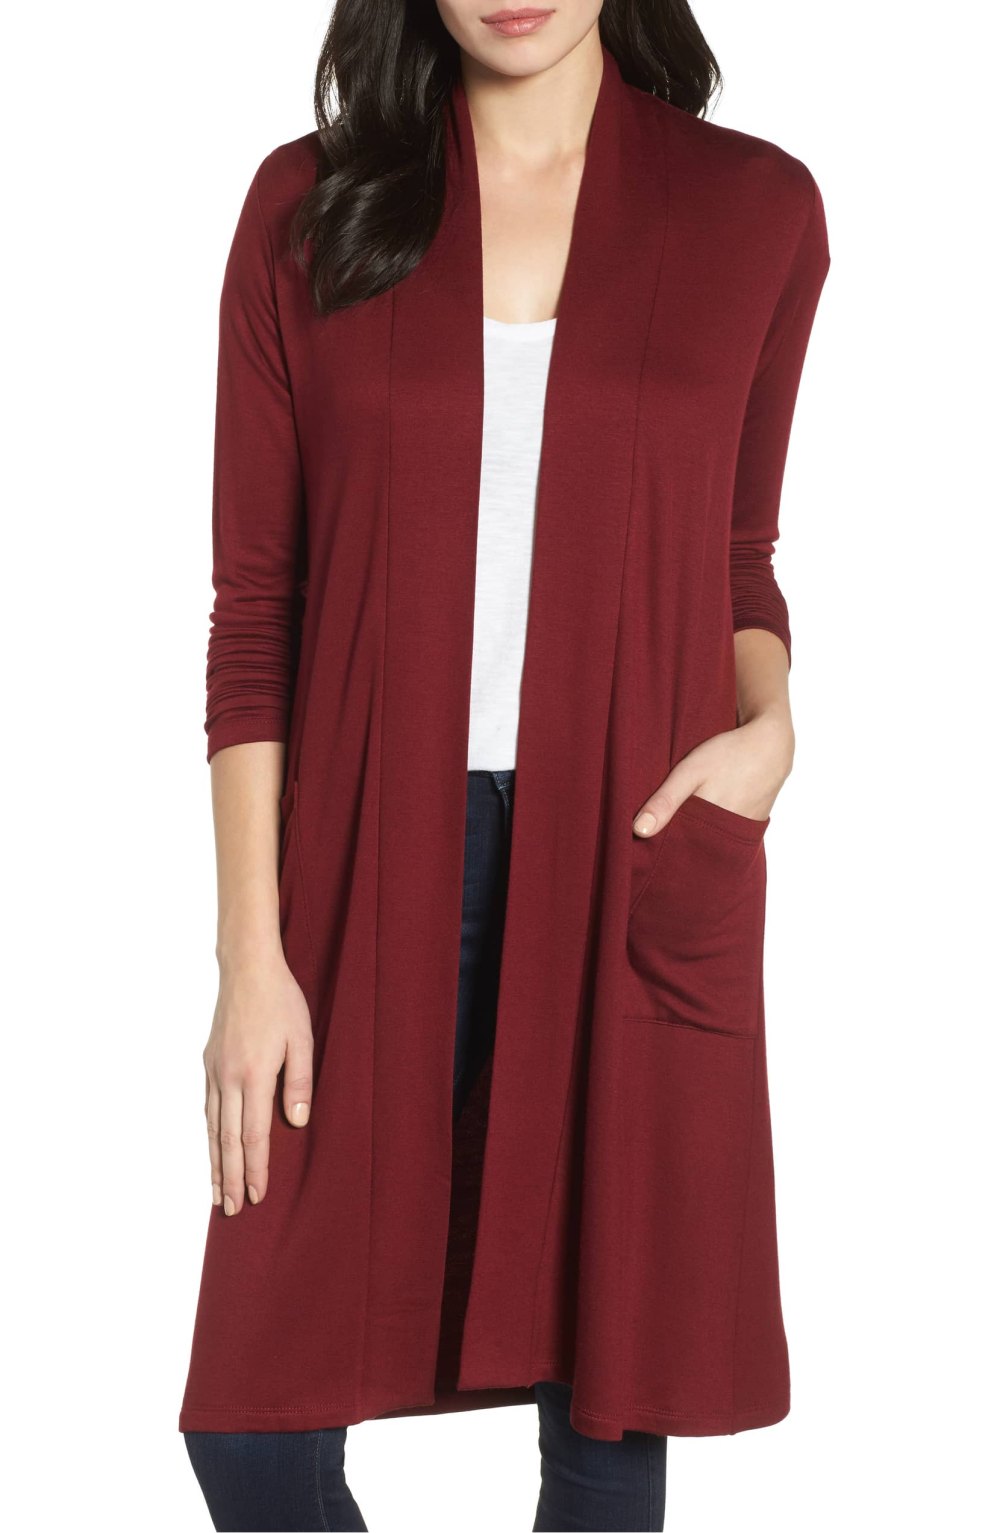 Shop This Fleece Cardigan to Stay Warm in Your Cold Office